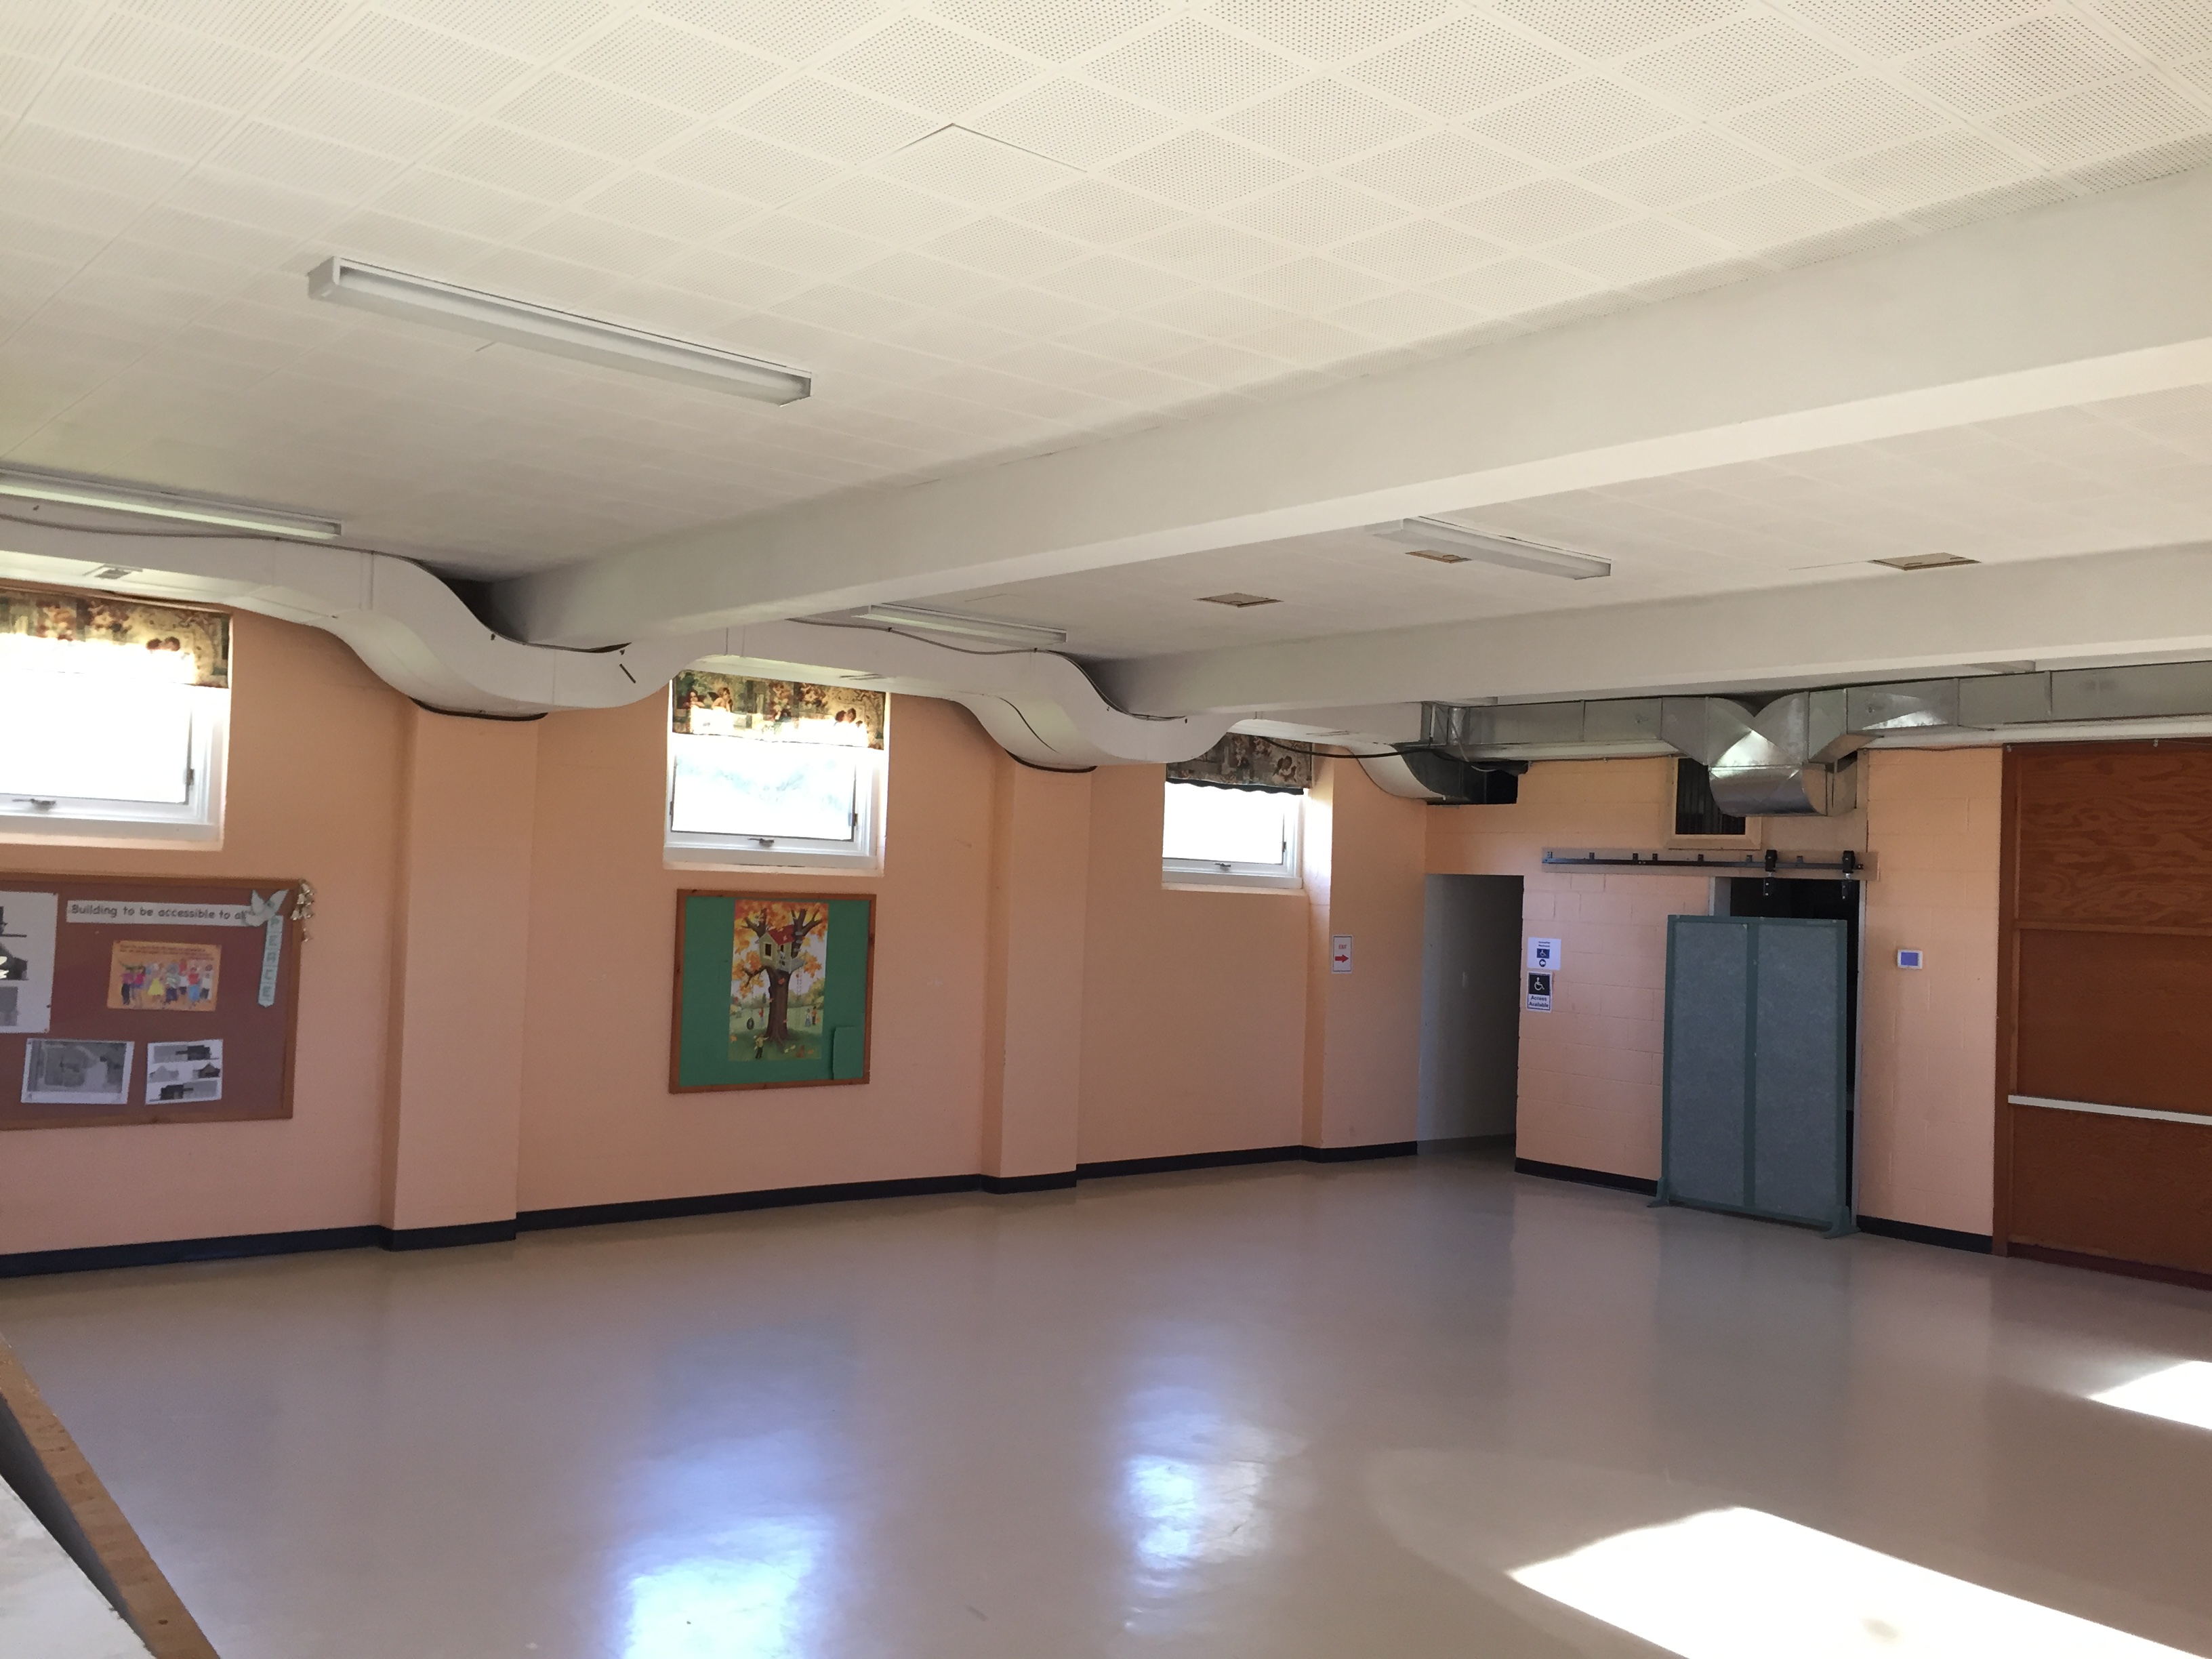 EarlyOn Youth Centre (incl. setup and cleaning time)